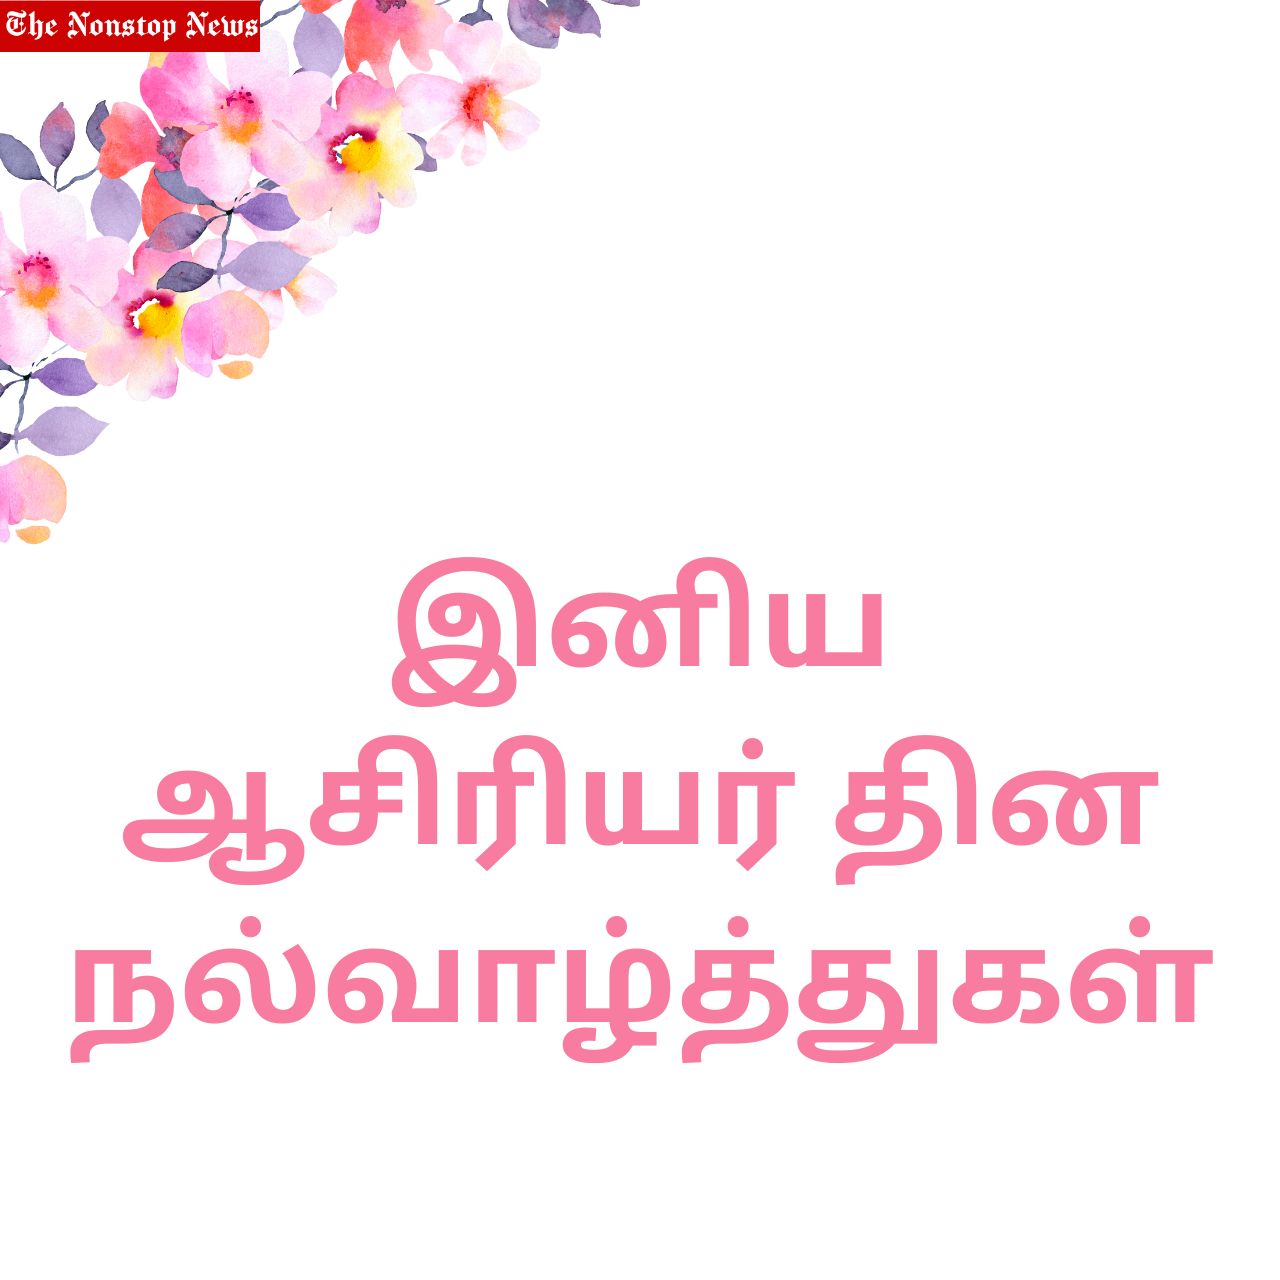 Happy Teachers' Day Tamil and Malayalam Wishes 2022: Quotes, Greetings, Images, Slogans, Messages, and Posters to Colleague/Coworker